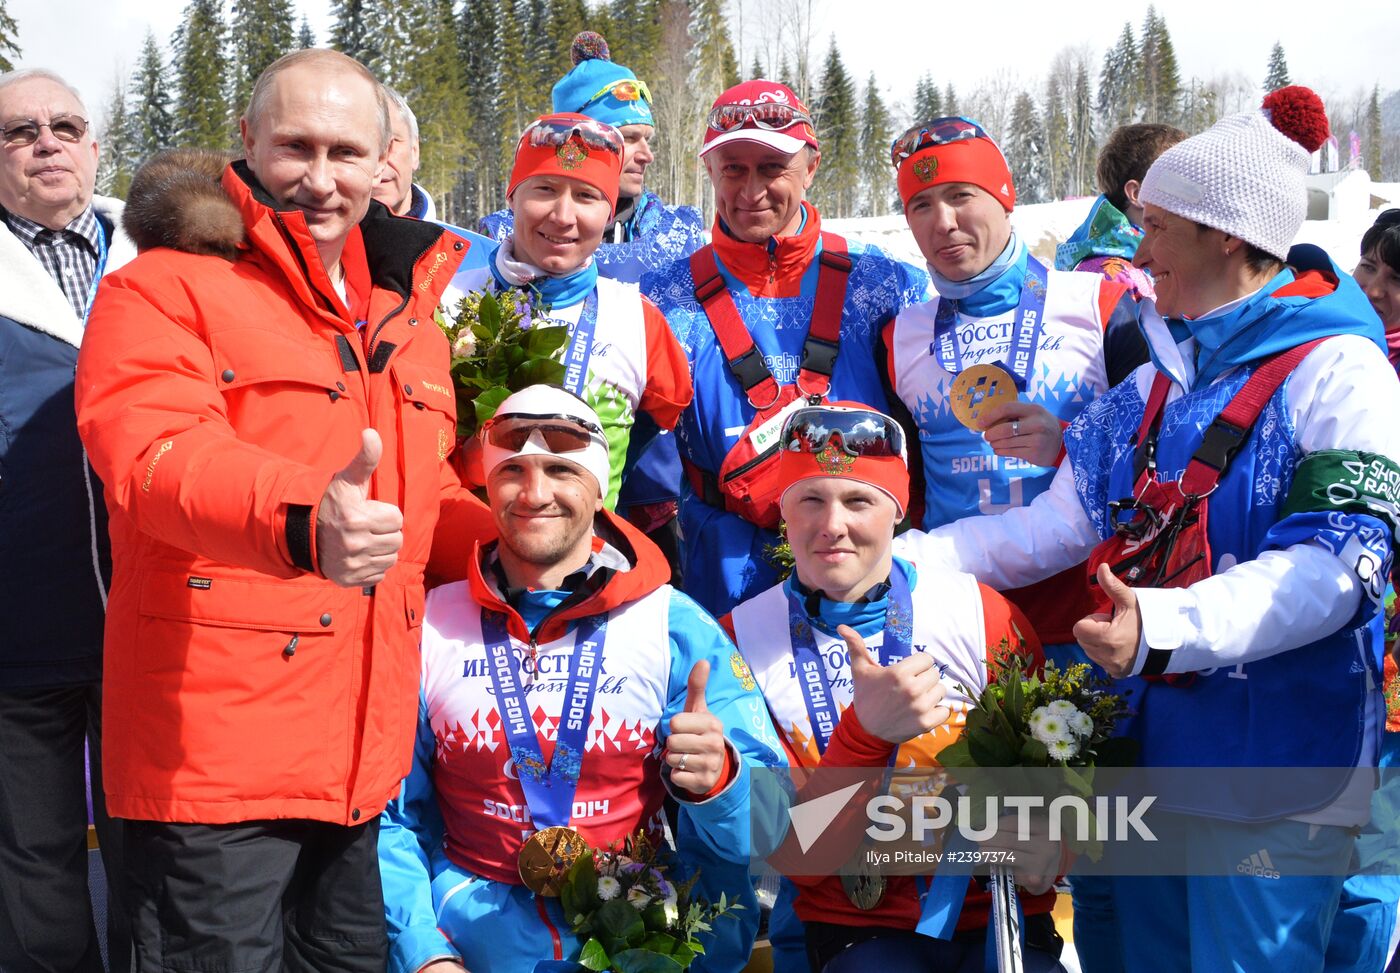 2014 Winter Paralympics. Cross-country skiing. Open relay